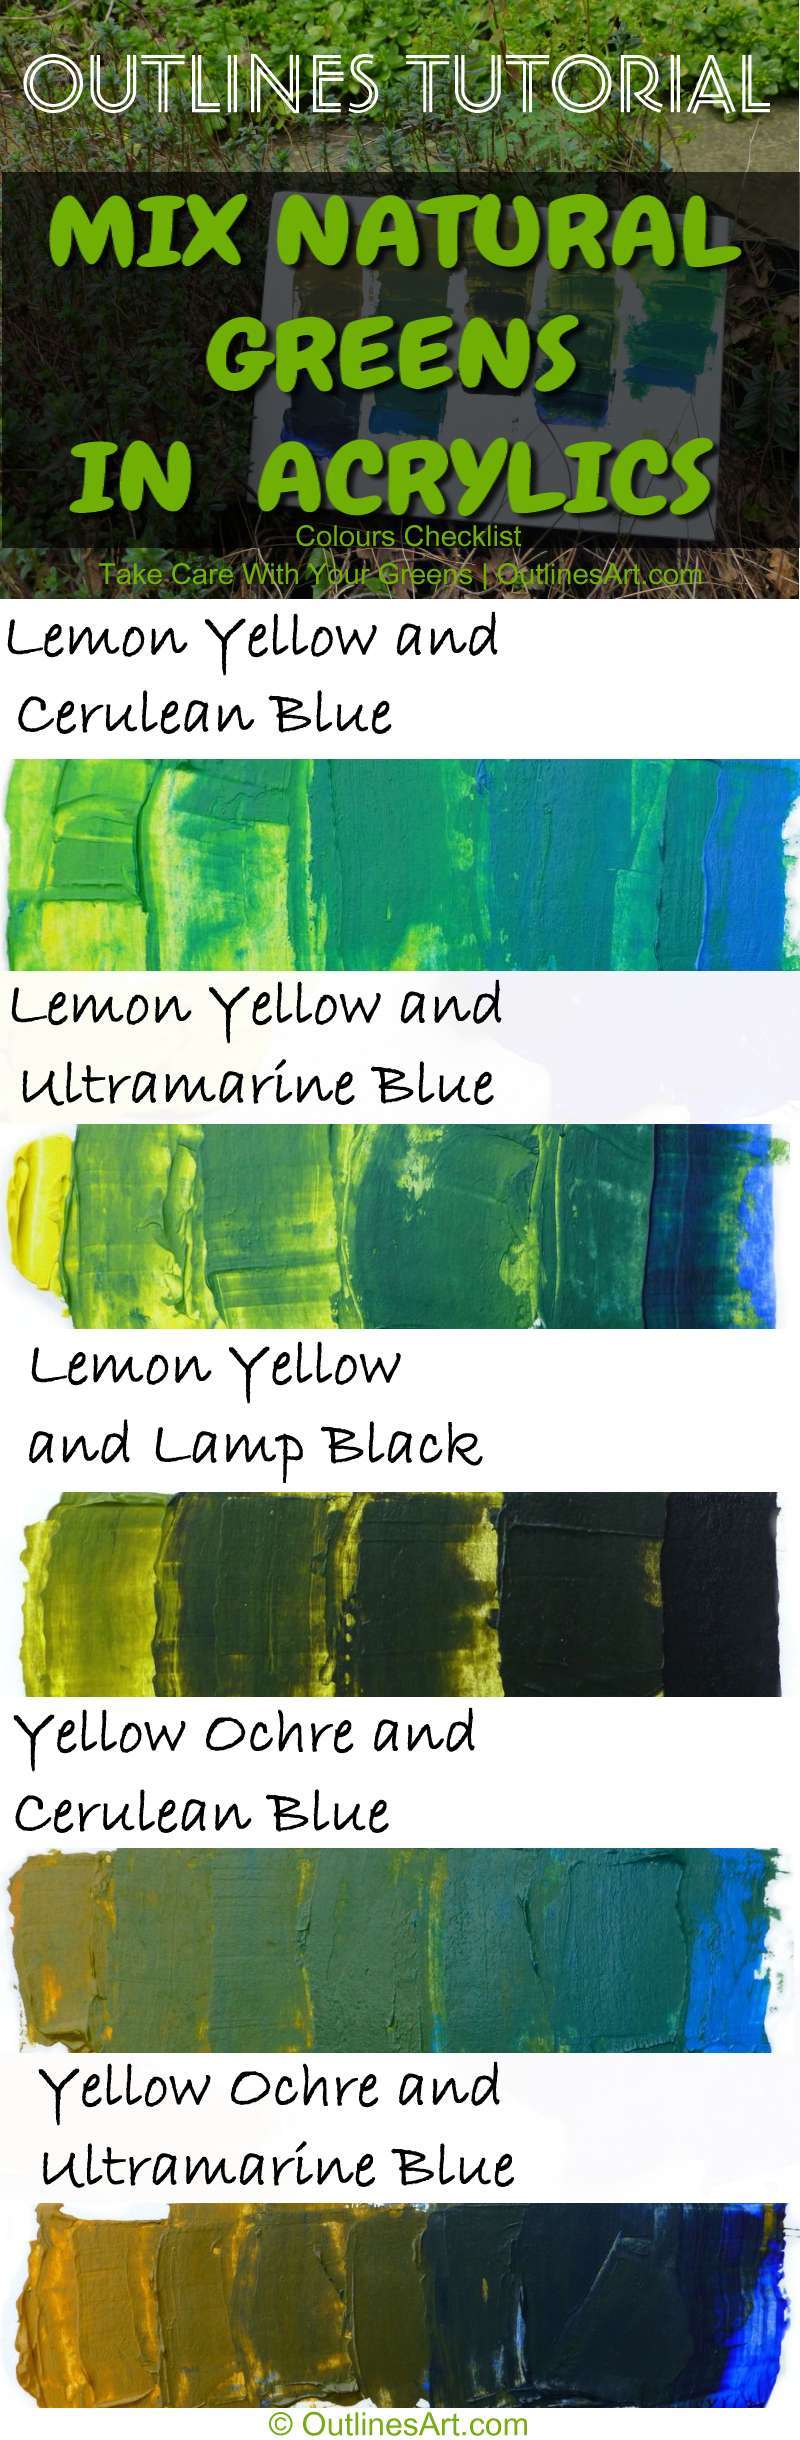 Checklist for Green colour mixing